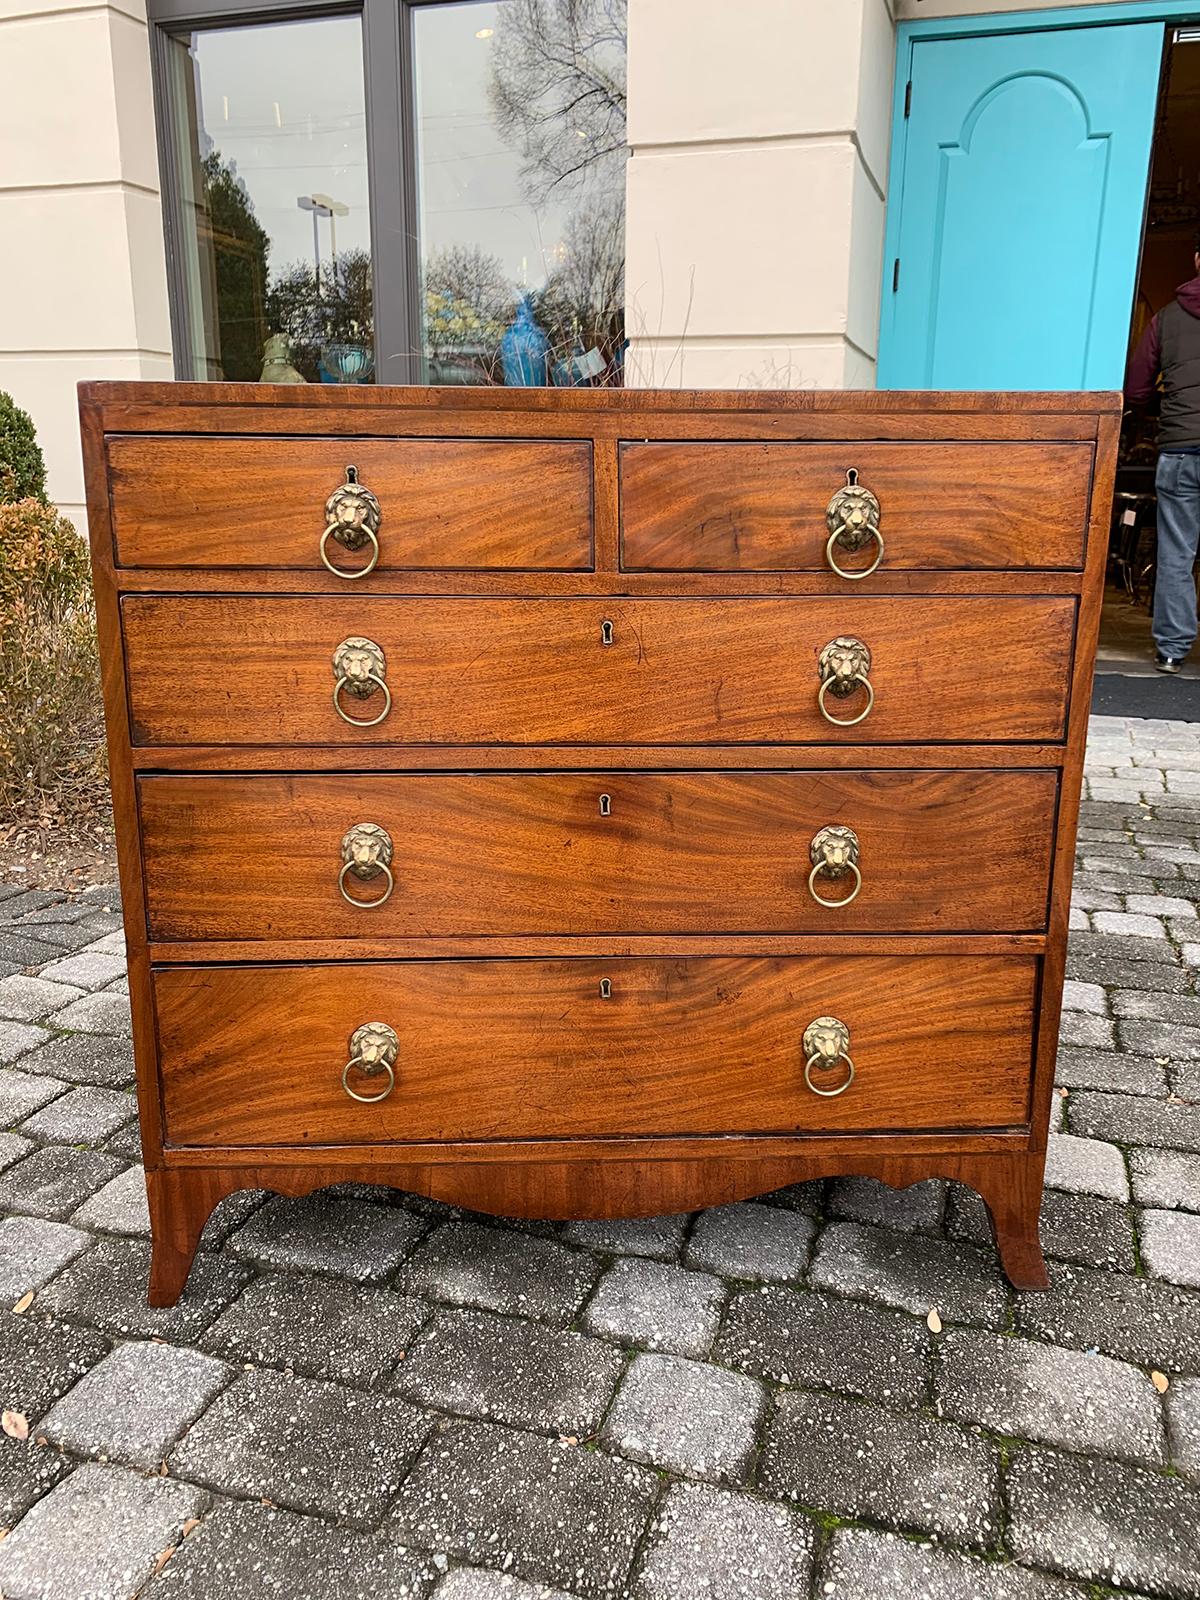 English Regency mahogany caddy top chest with lion pulls, circa 1820s
Five drawers
Brass lion head pulls
Serpentine shaped apron.